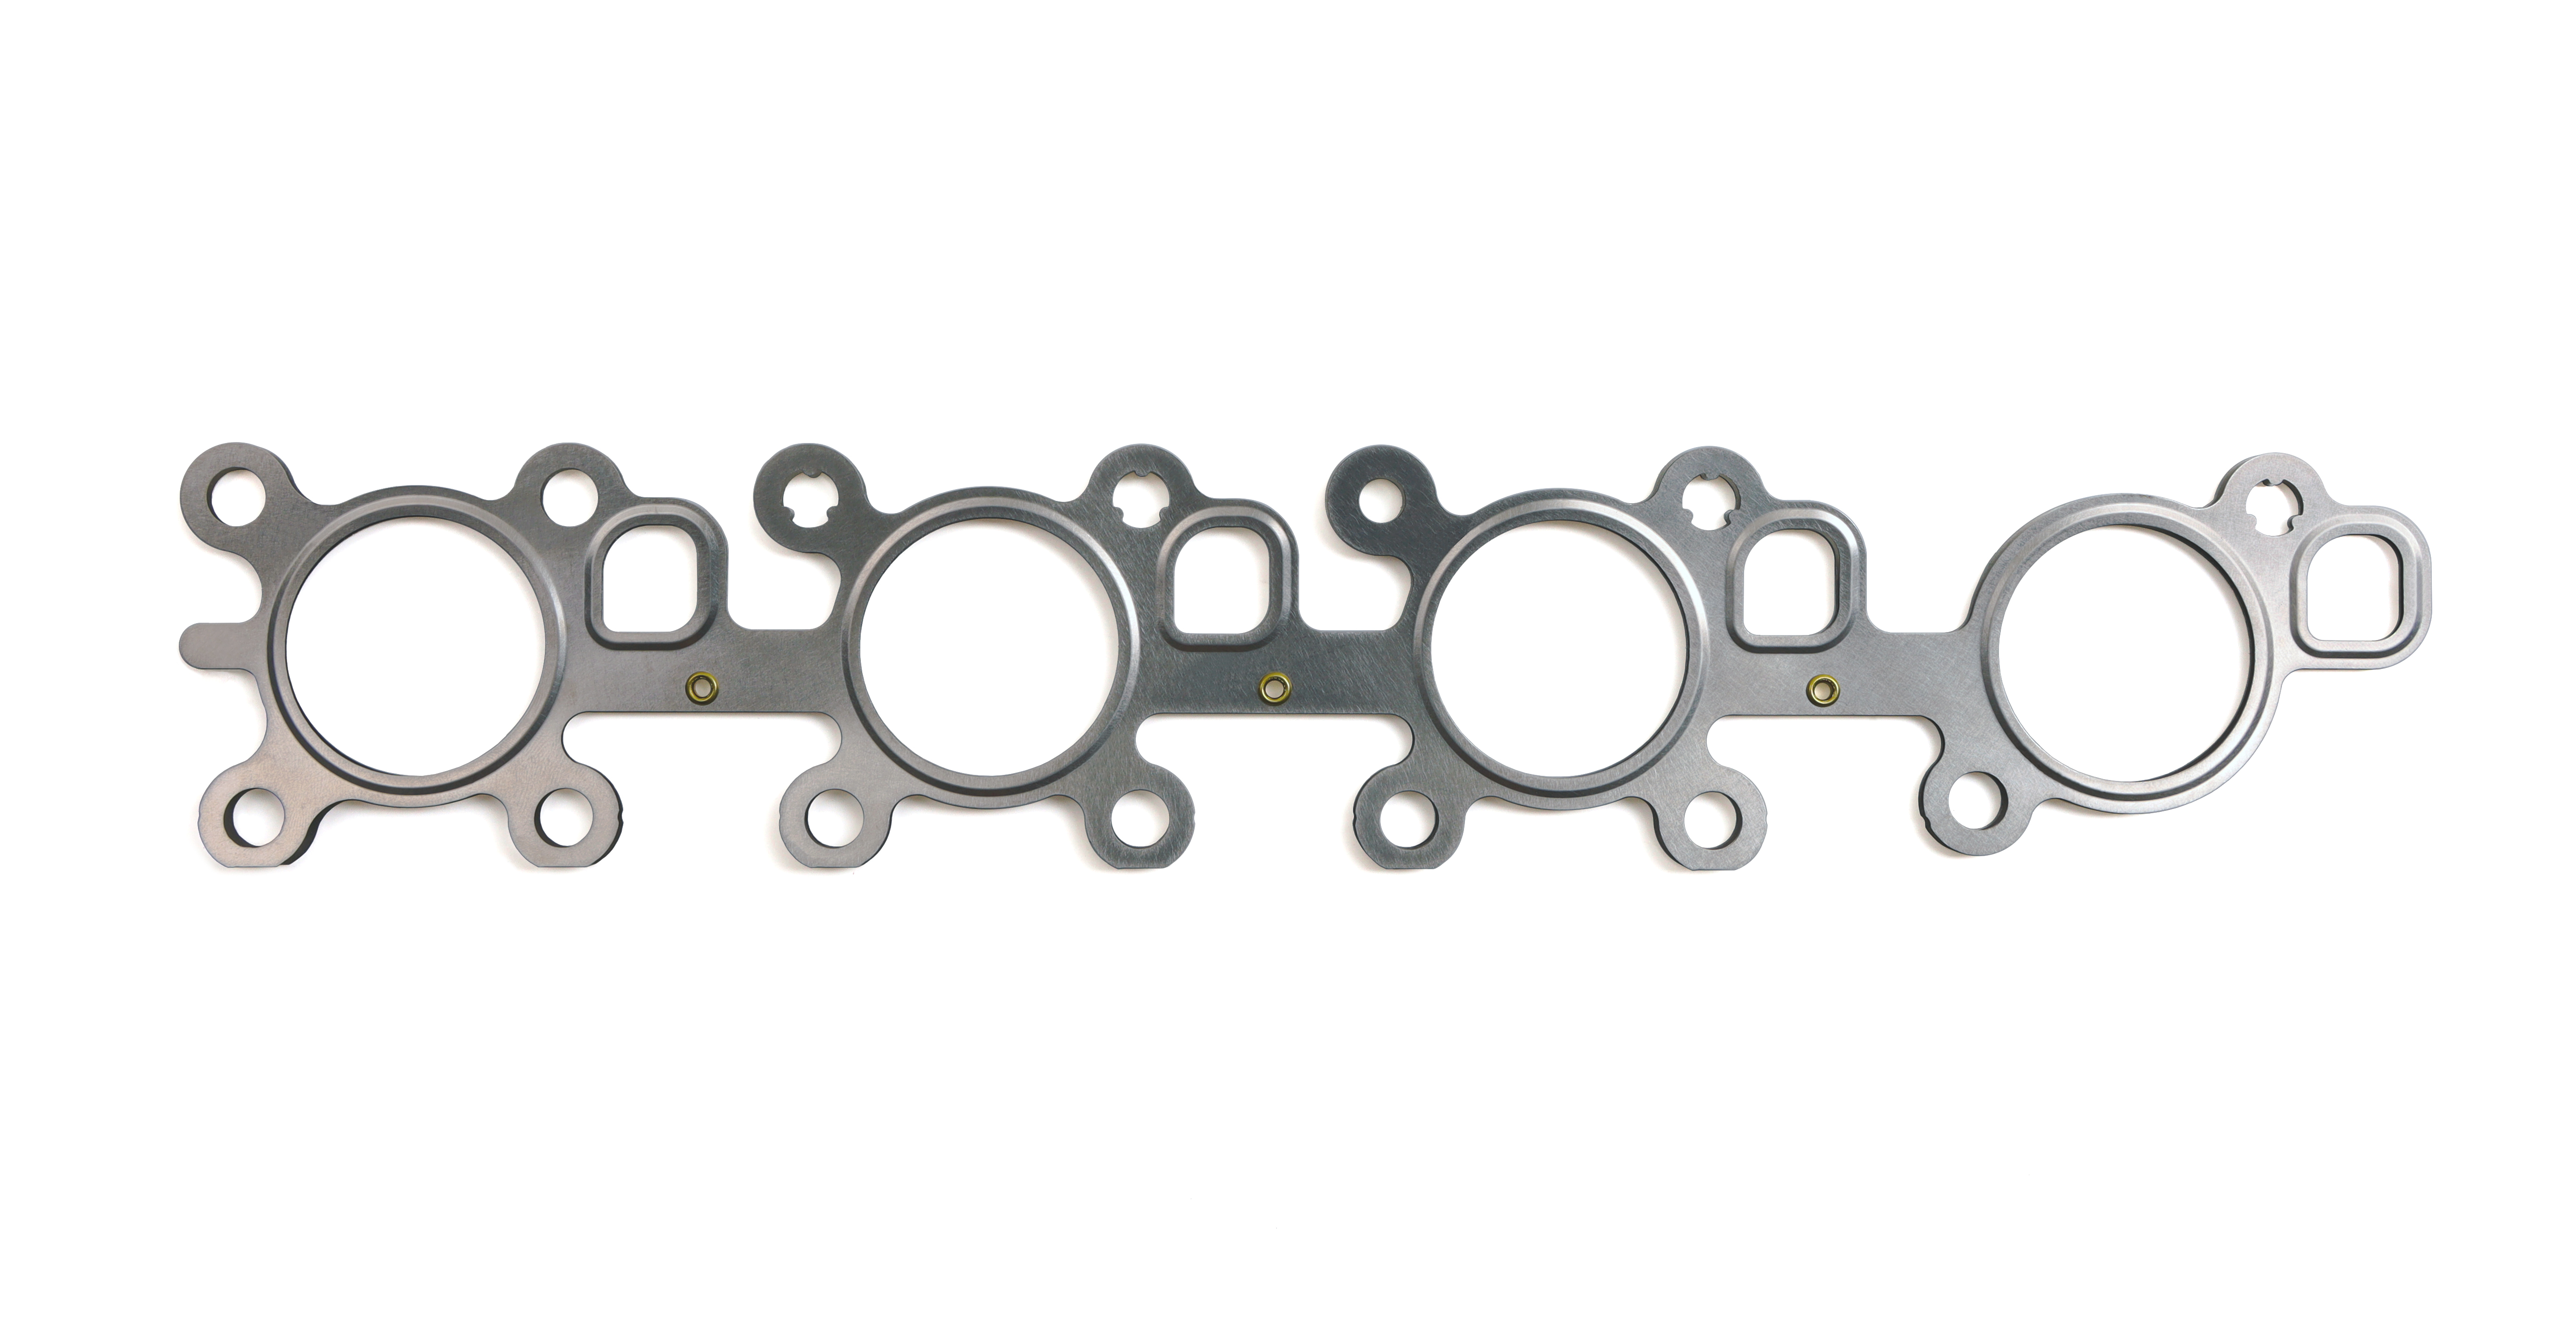 Cometic Gaskets C14125-040 Exhaust Header / Manifold Gasket, 1.890 in Round Port, Multi-Layer Steel, Toyota V8 2007-19, Each